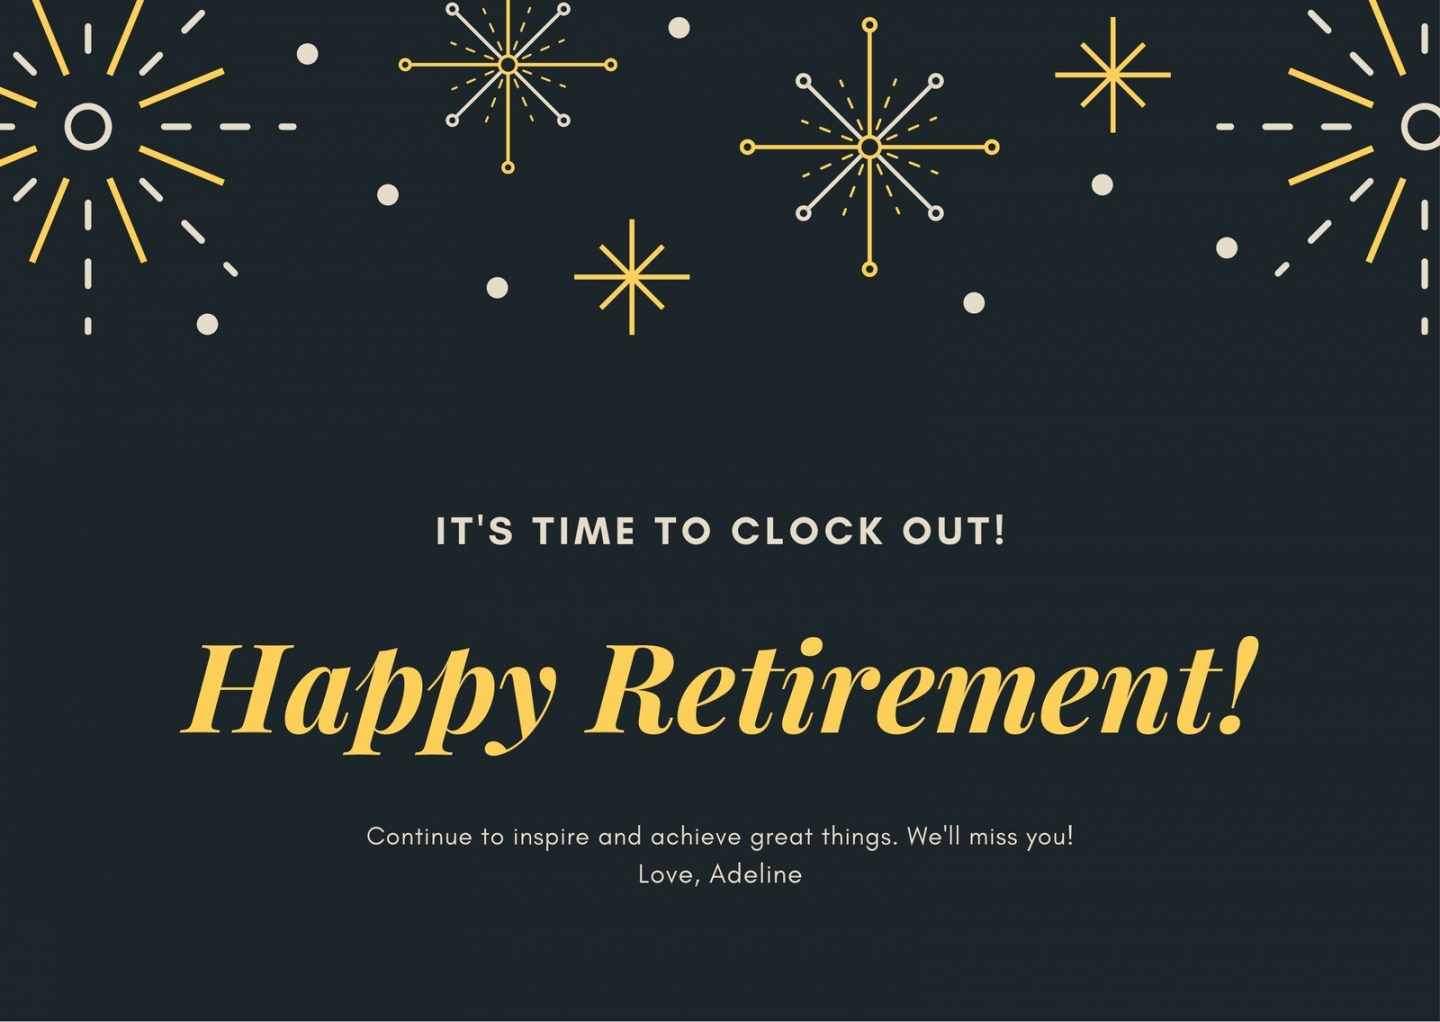 Free printable, customizable retirement card templates  Canva - FREE Printables - Free Printable Retirement Cards